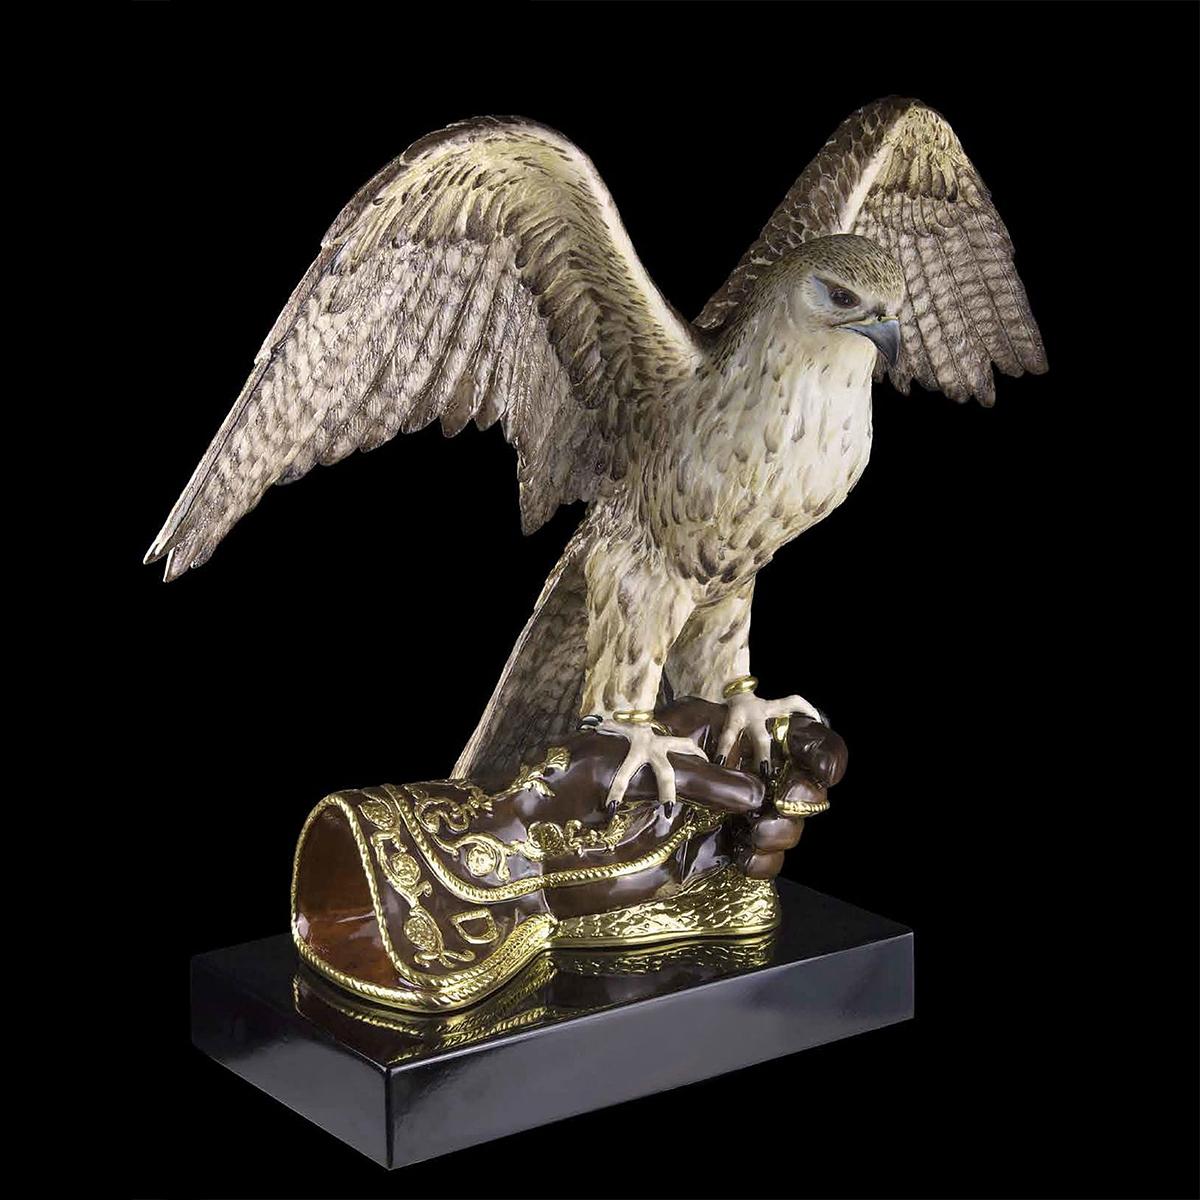 Sculpture Falcon flying in handmade porcelain,
hand painted piece with finishing in gold 24-karat
Limited Edition of 38 pieces.